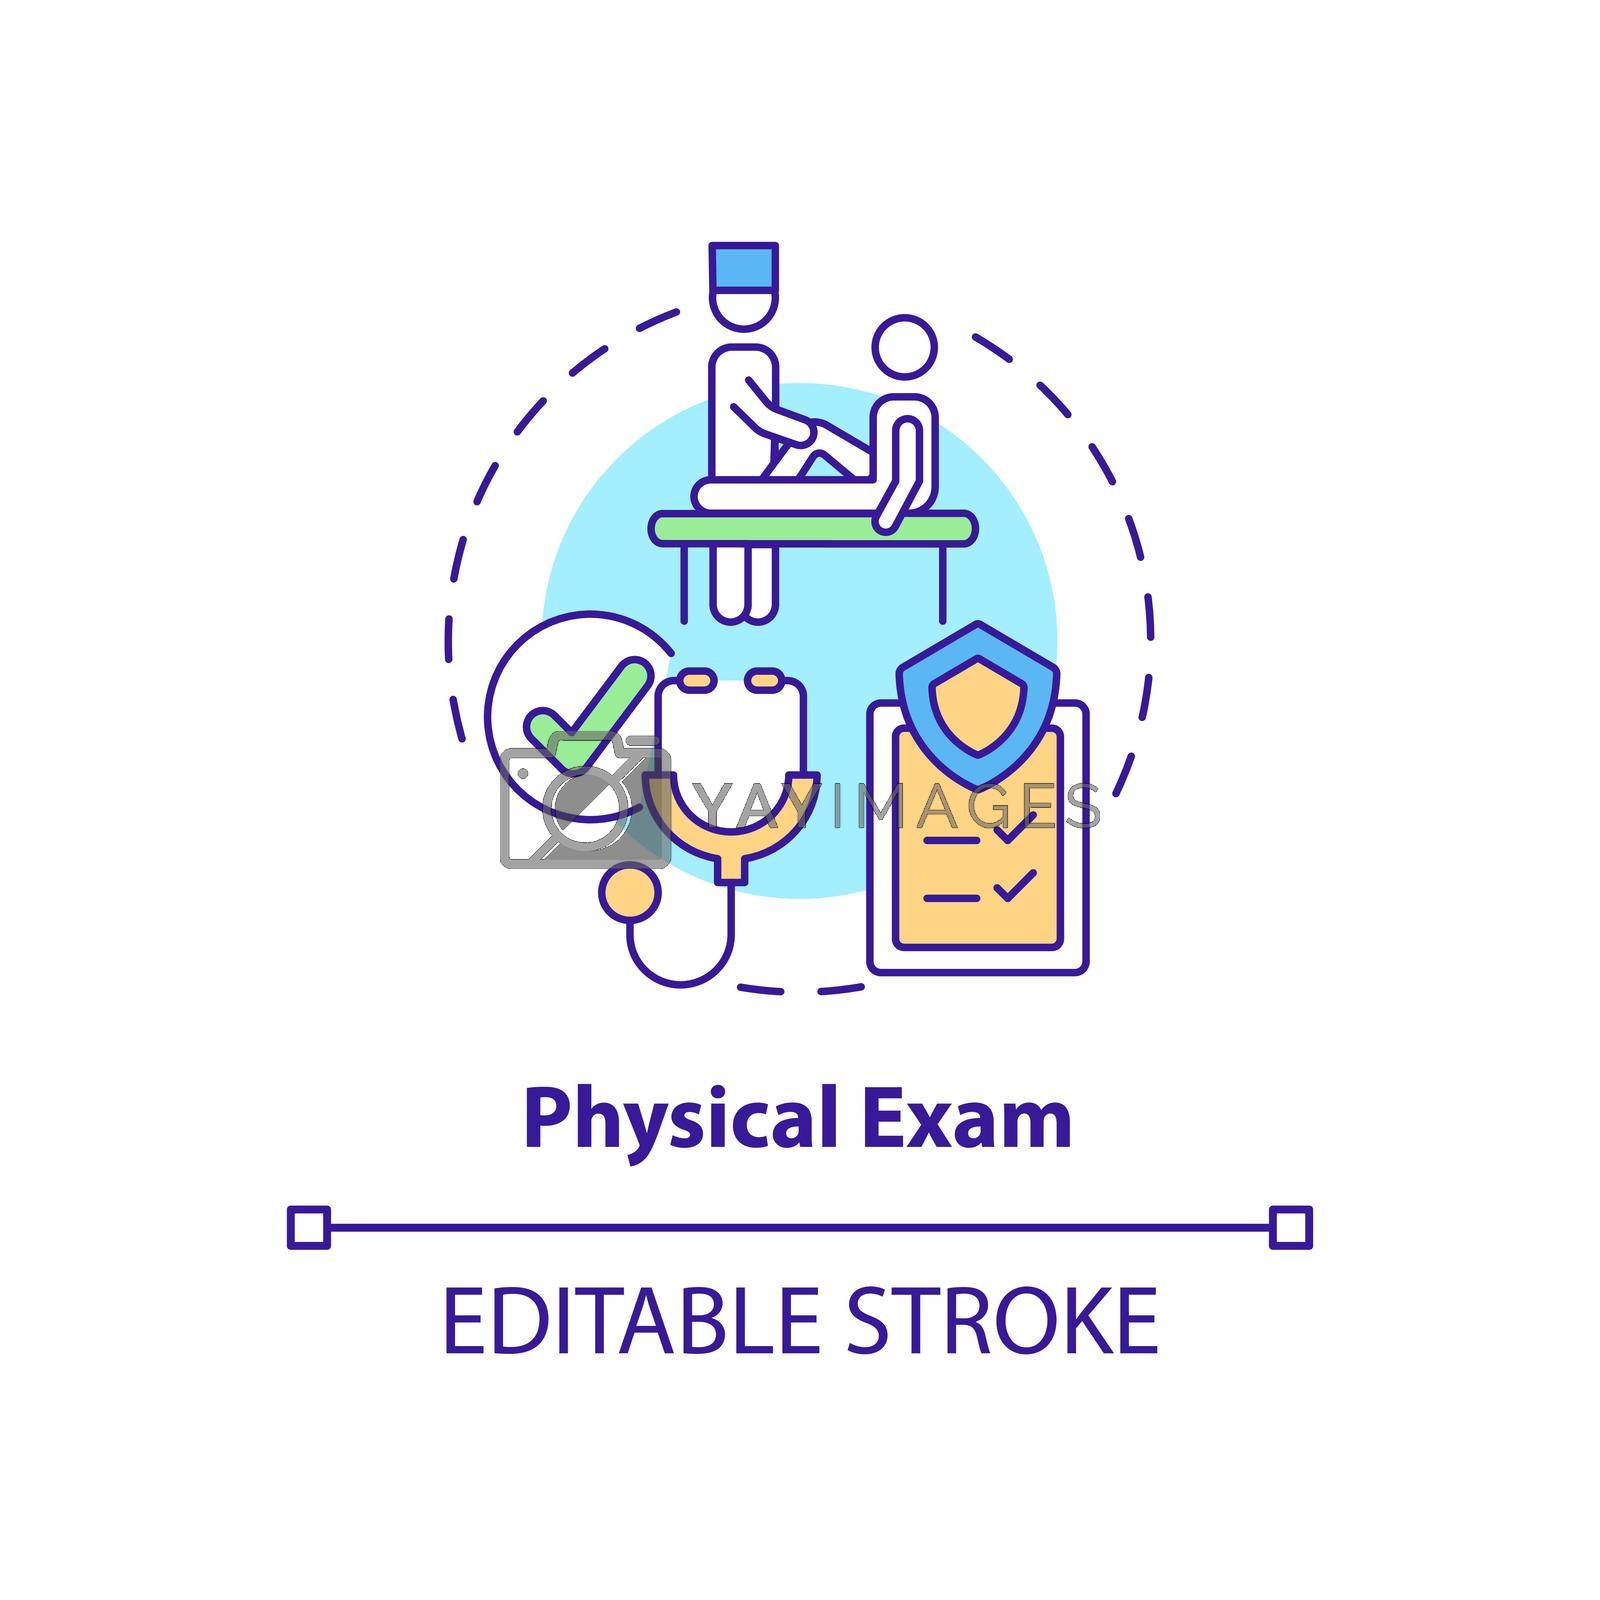 Royalty free image of Physical exam concept icon by bsd